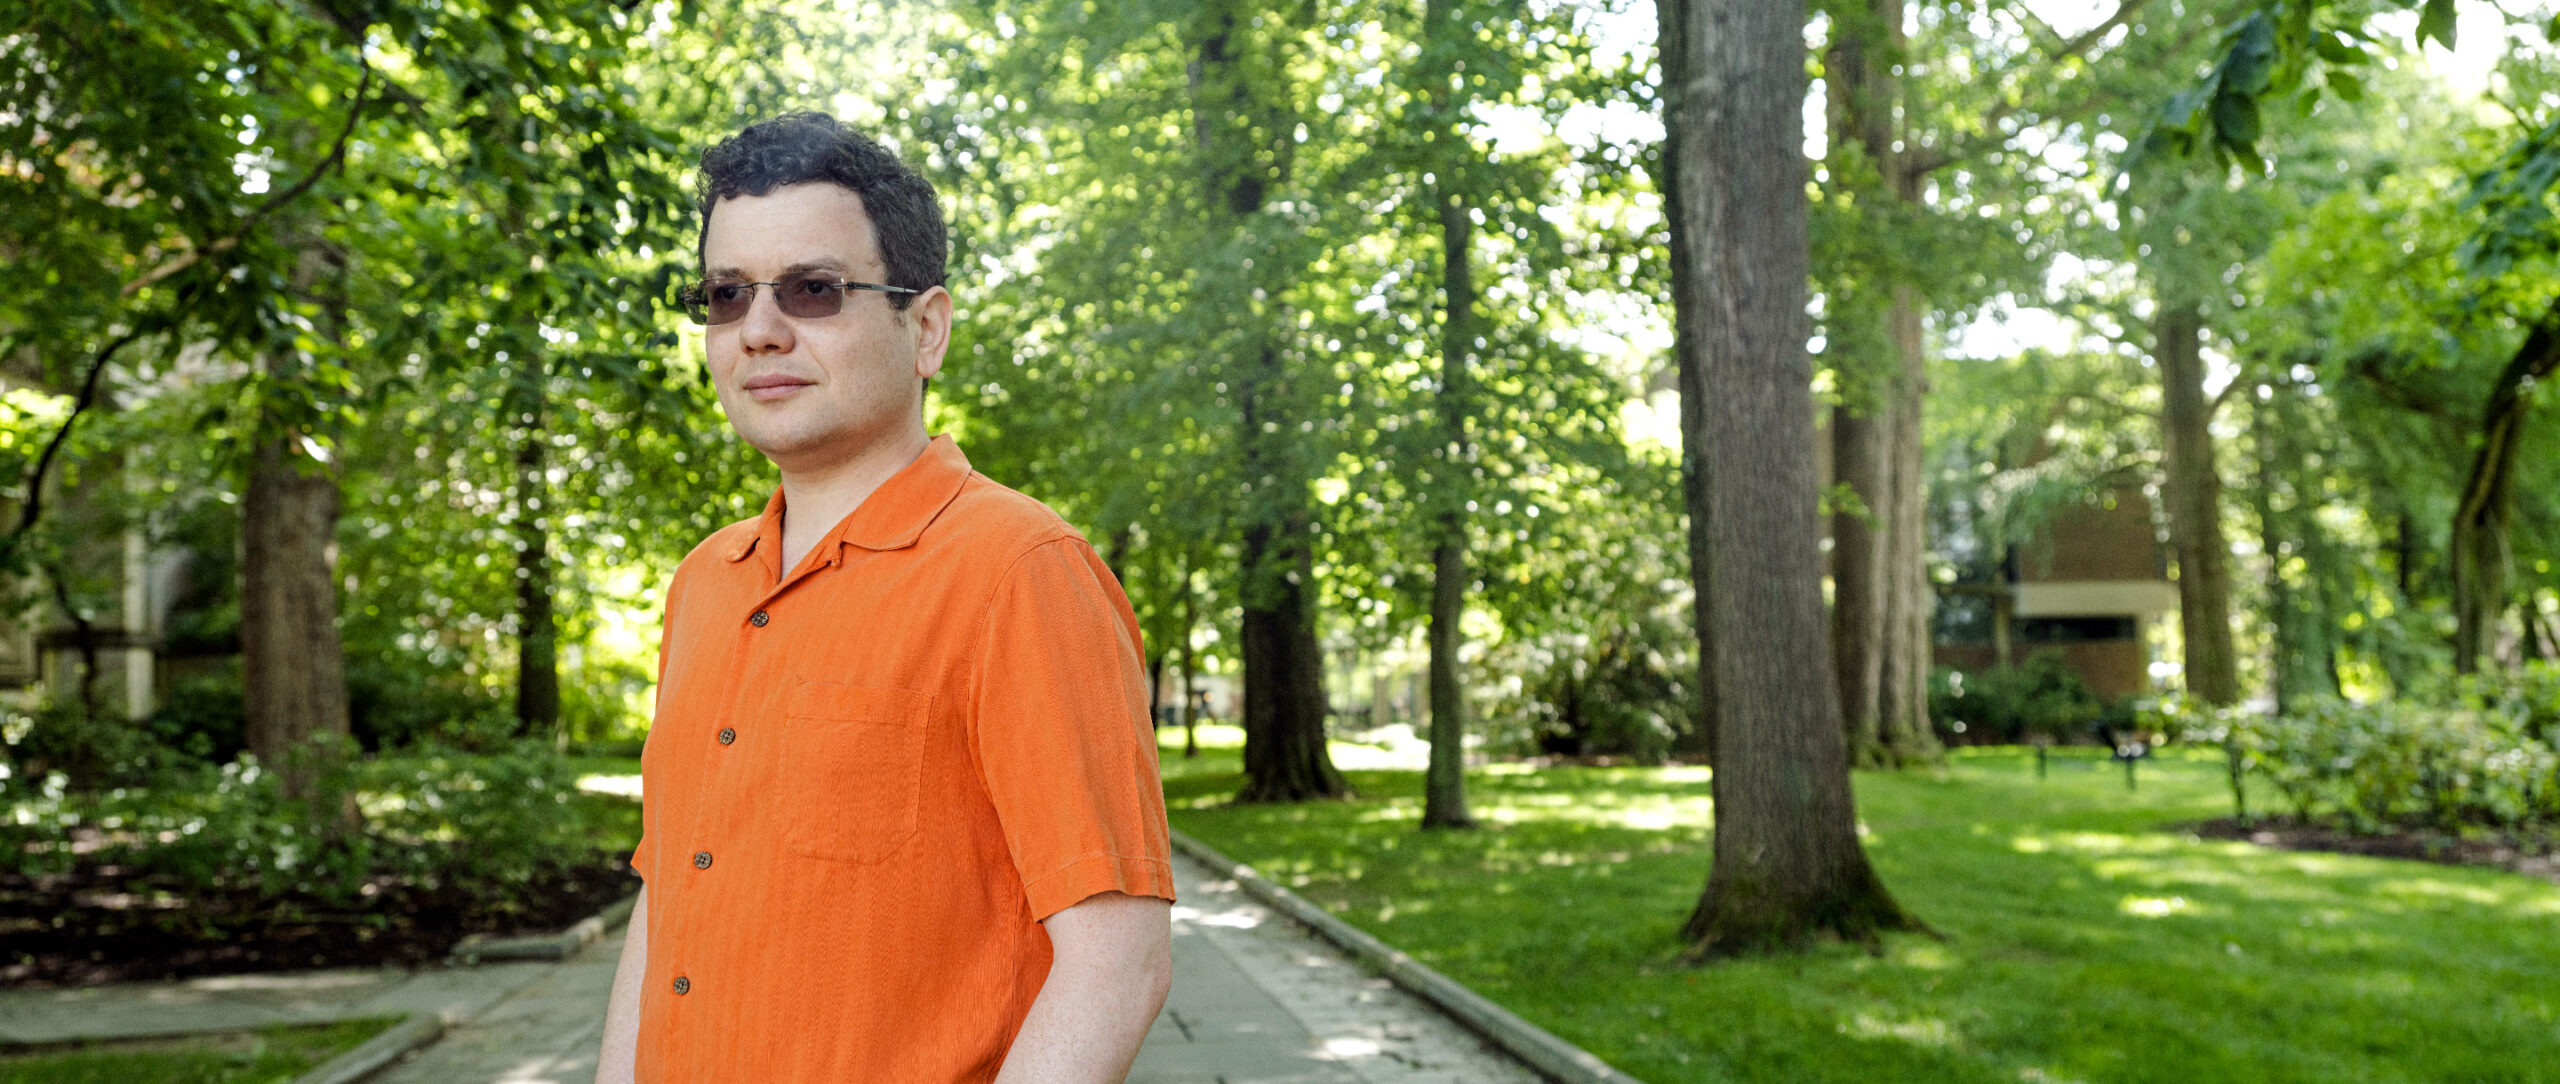 Mark Braverman in an orange shirt in an alley among trees